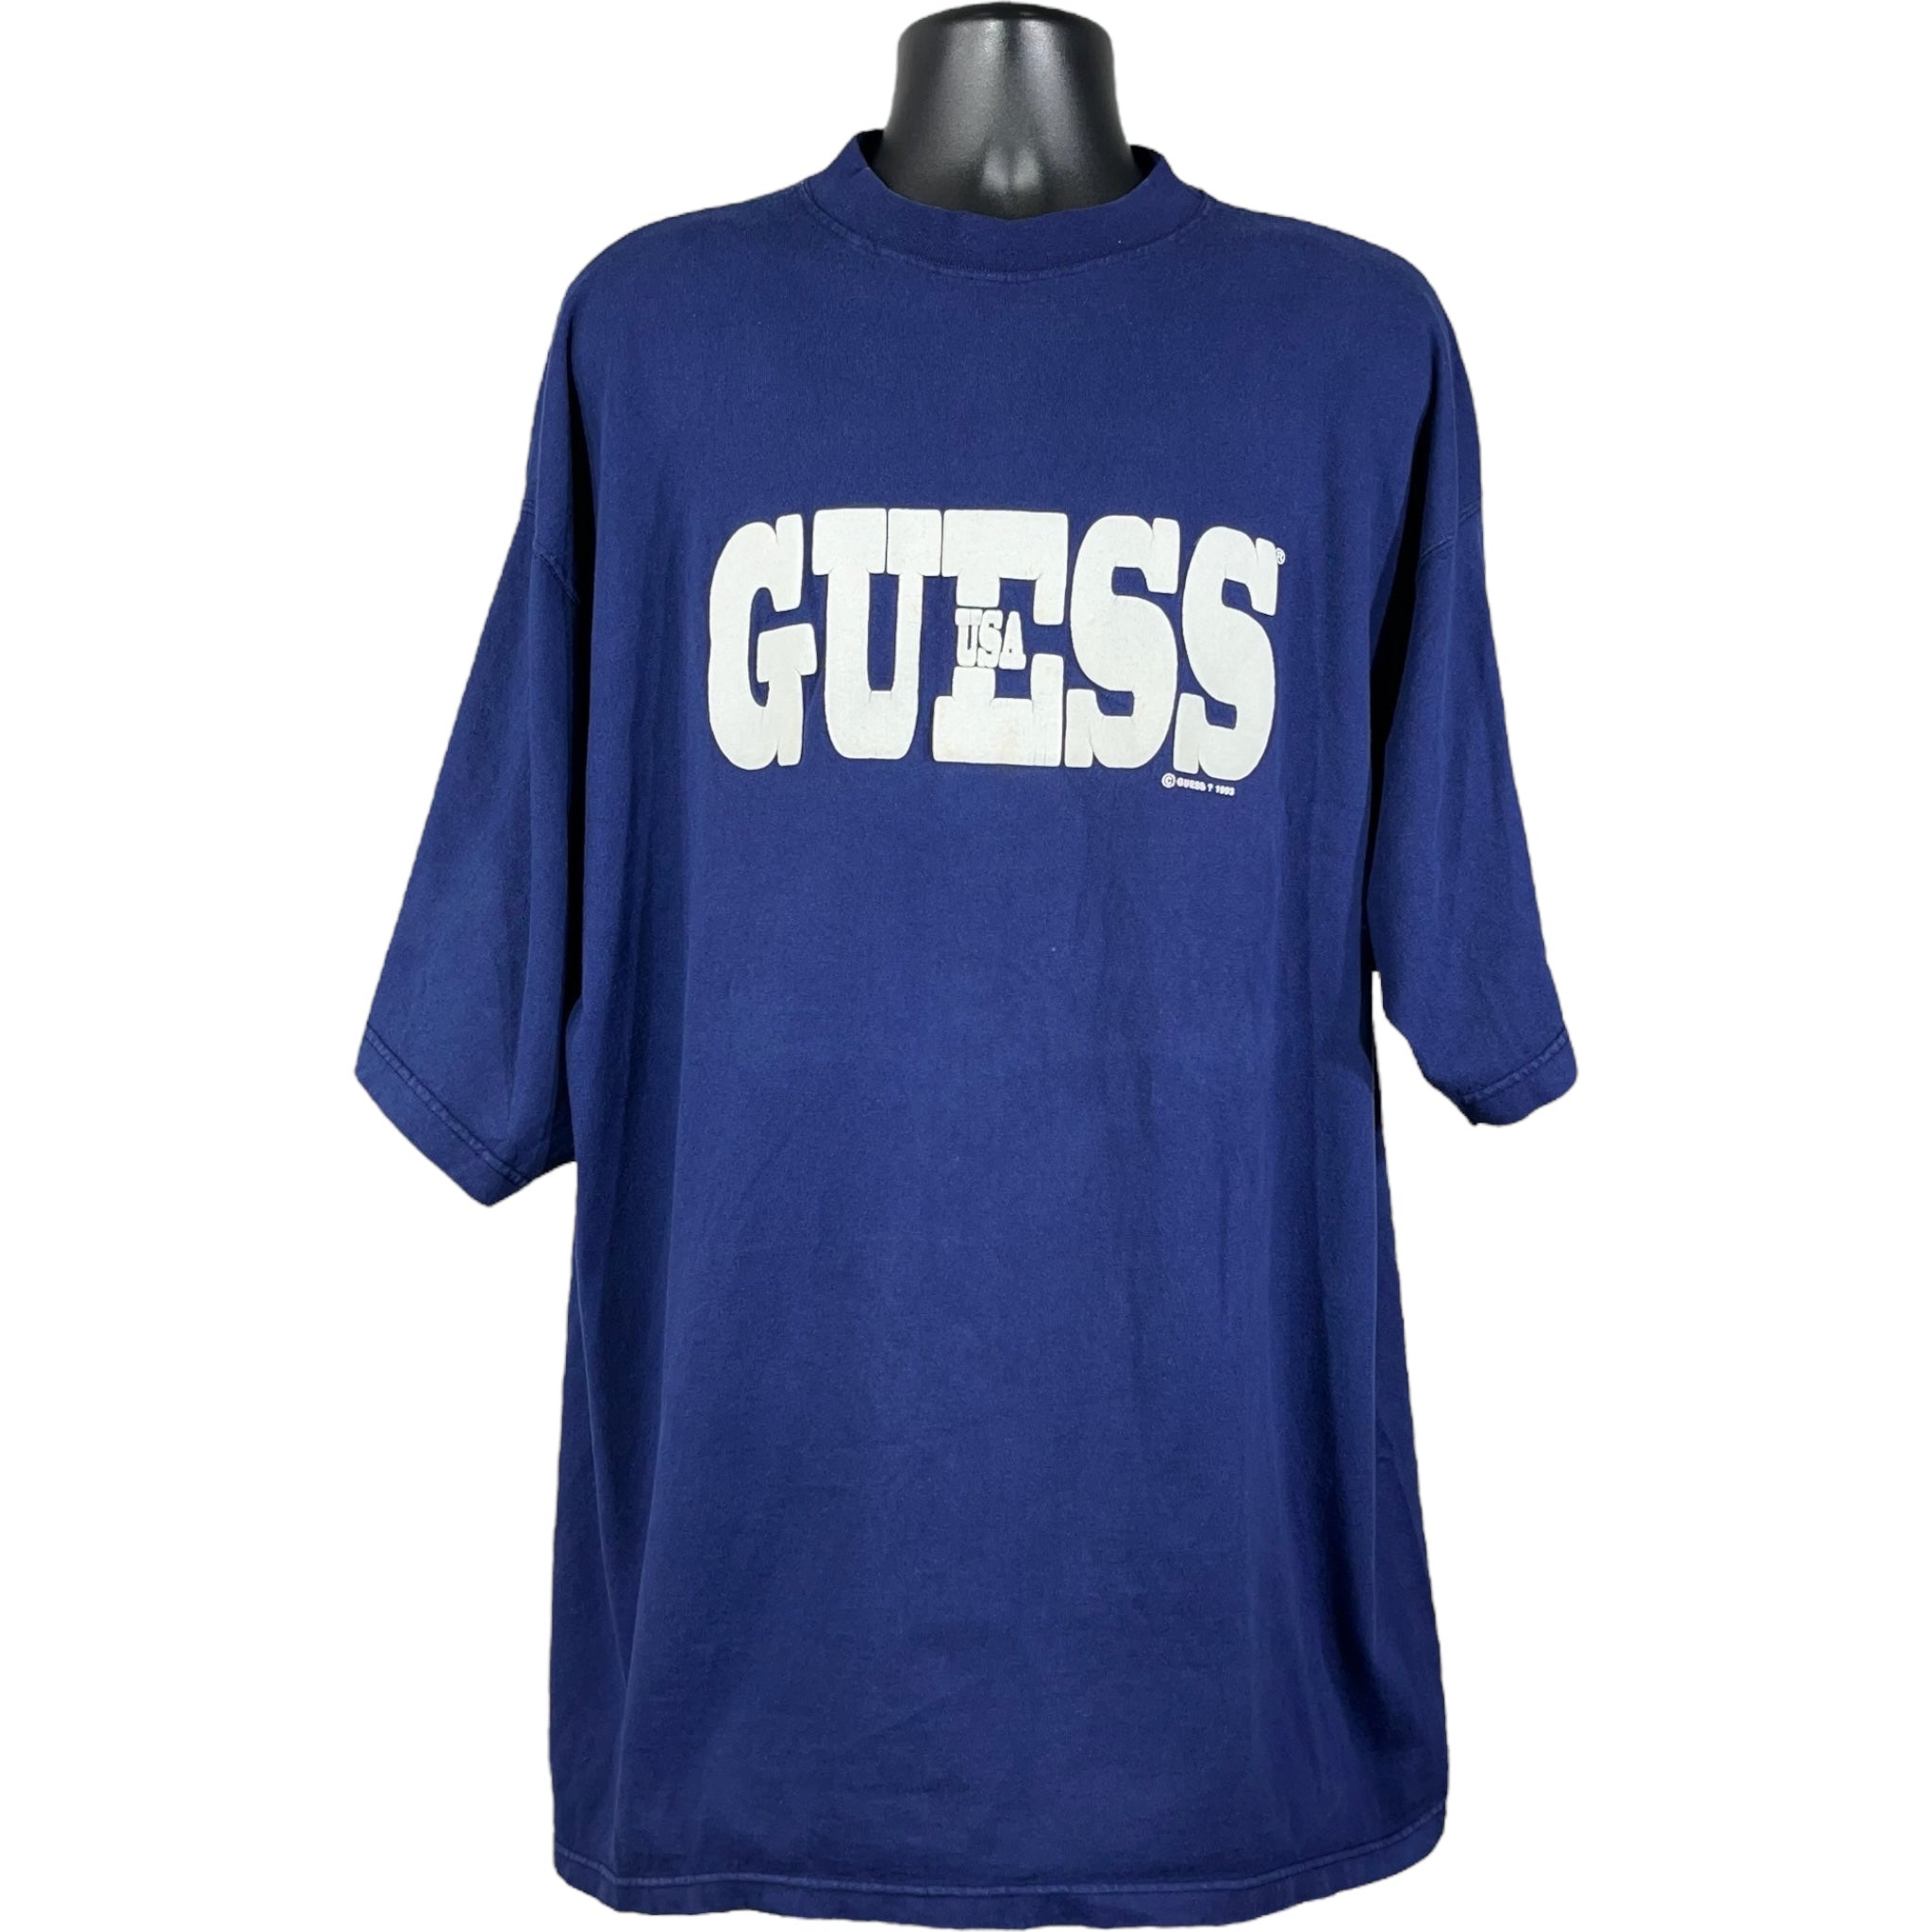 Vintage Guess Puff Print Spellout Tee 90s